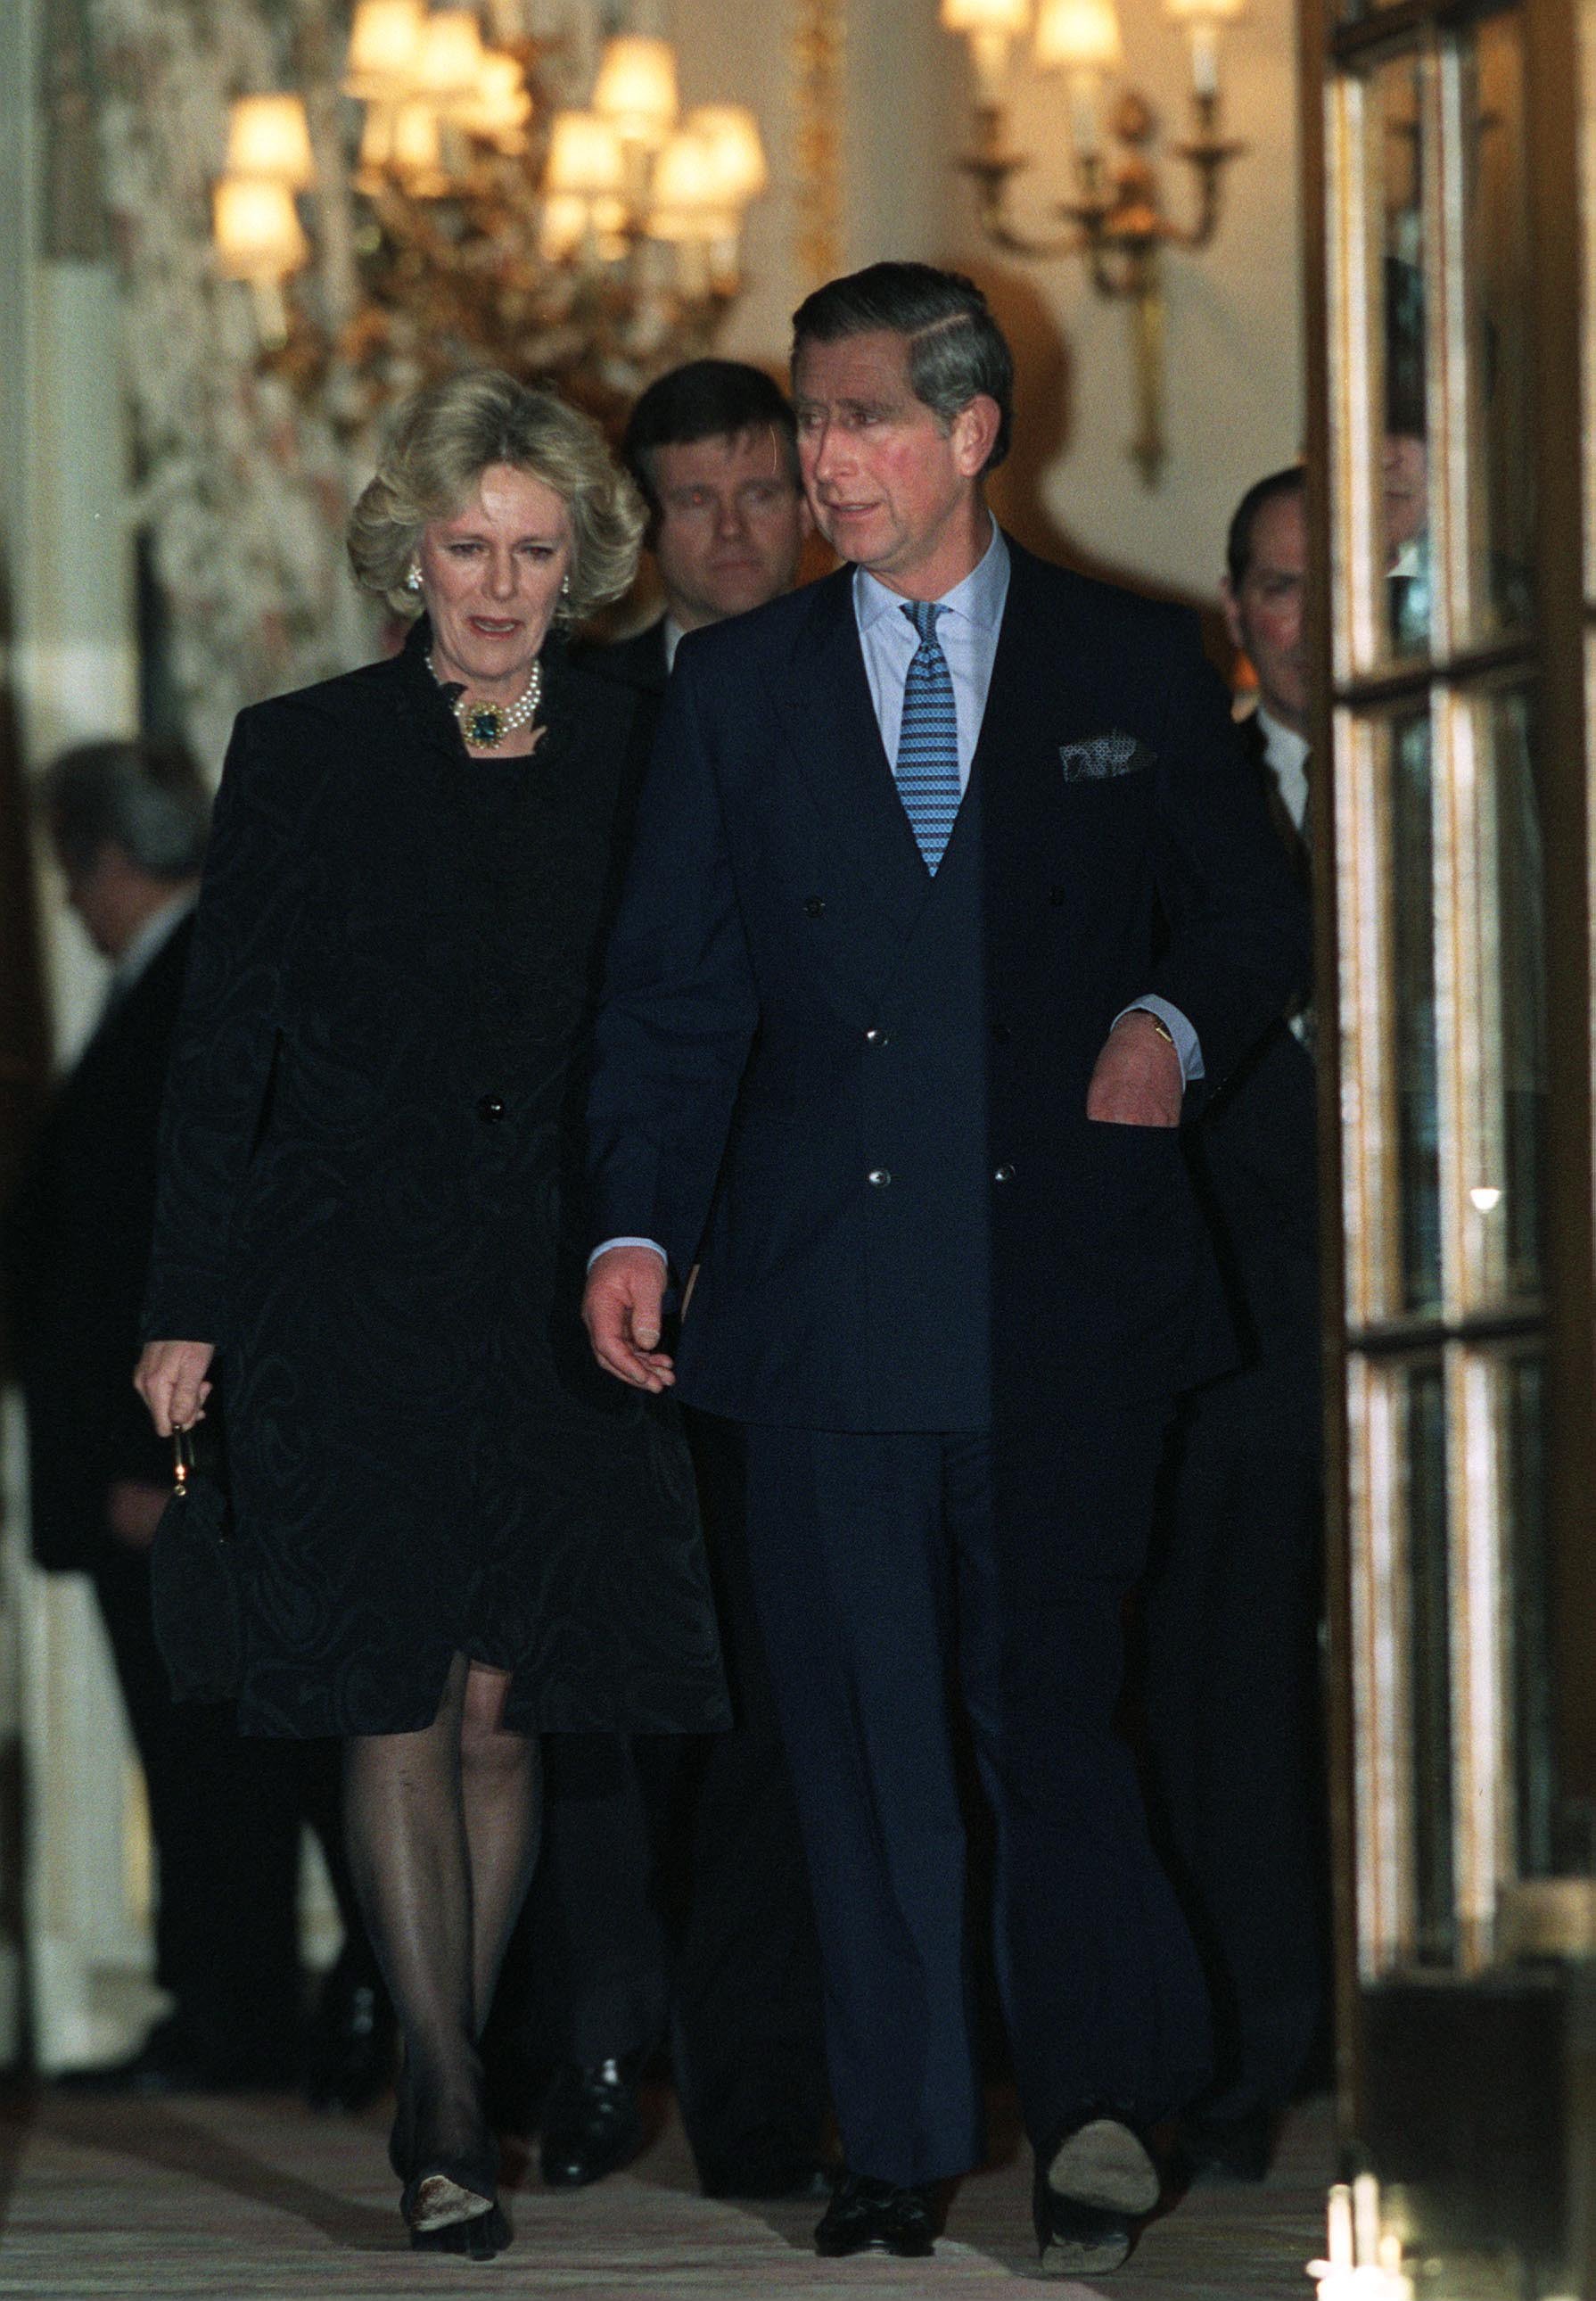 Prince Charles and his wife, Camilla Parker-Bowles, seen leaving the Ritz Hotel in London. | Source: Getty Images